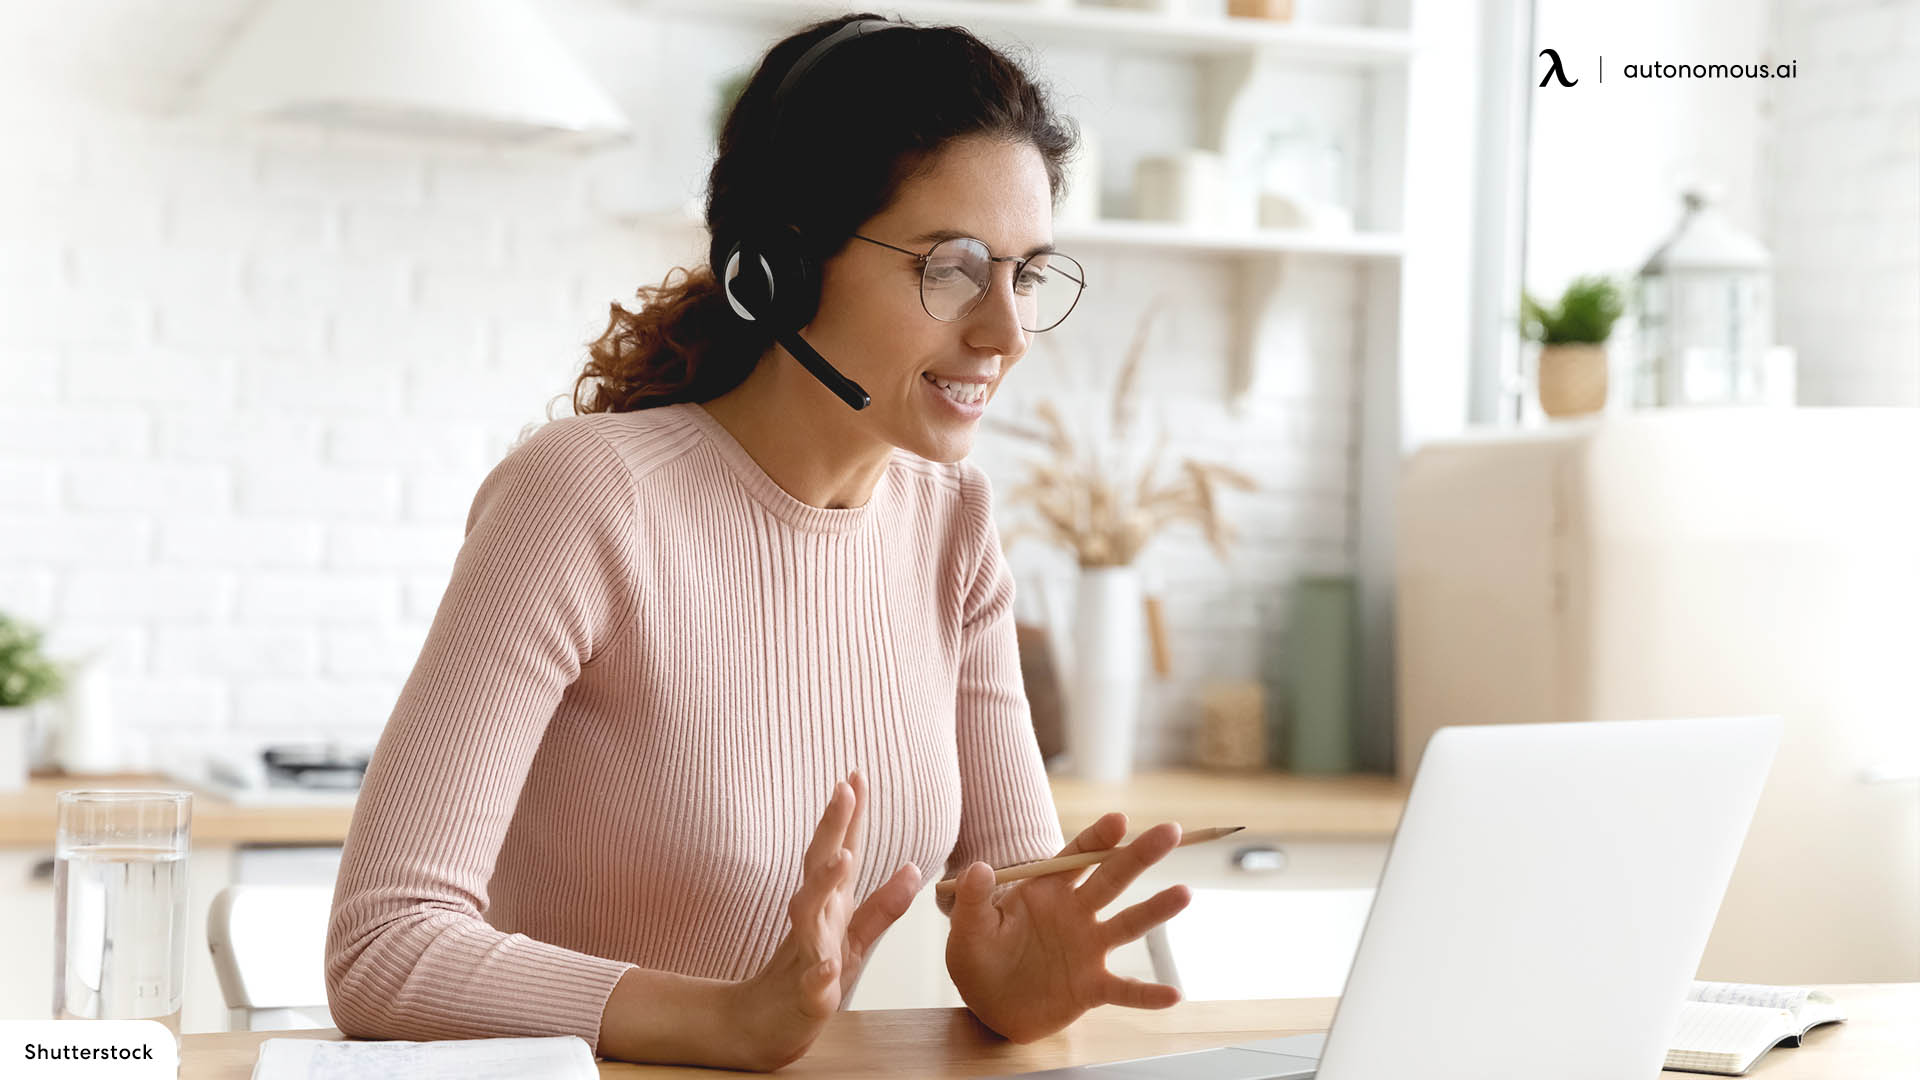 Best practices for training new employees remotely